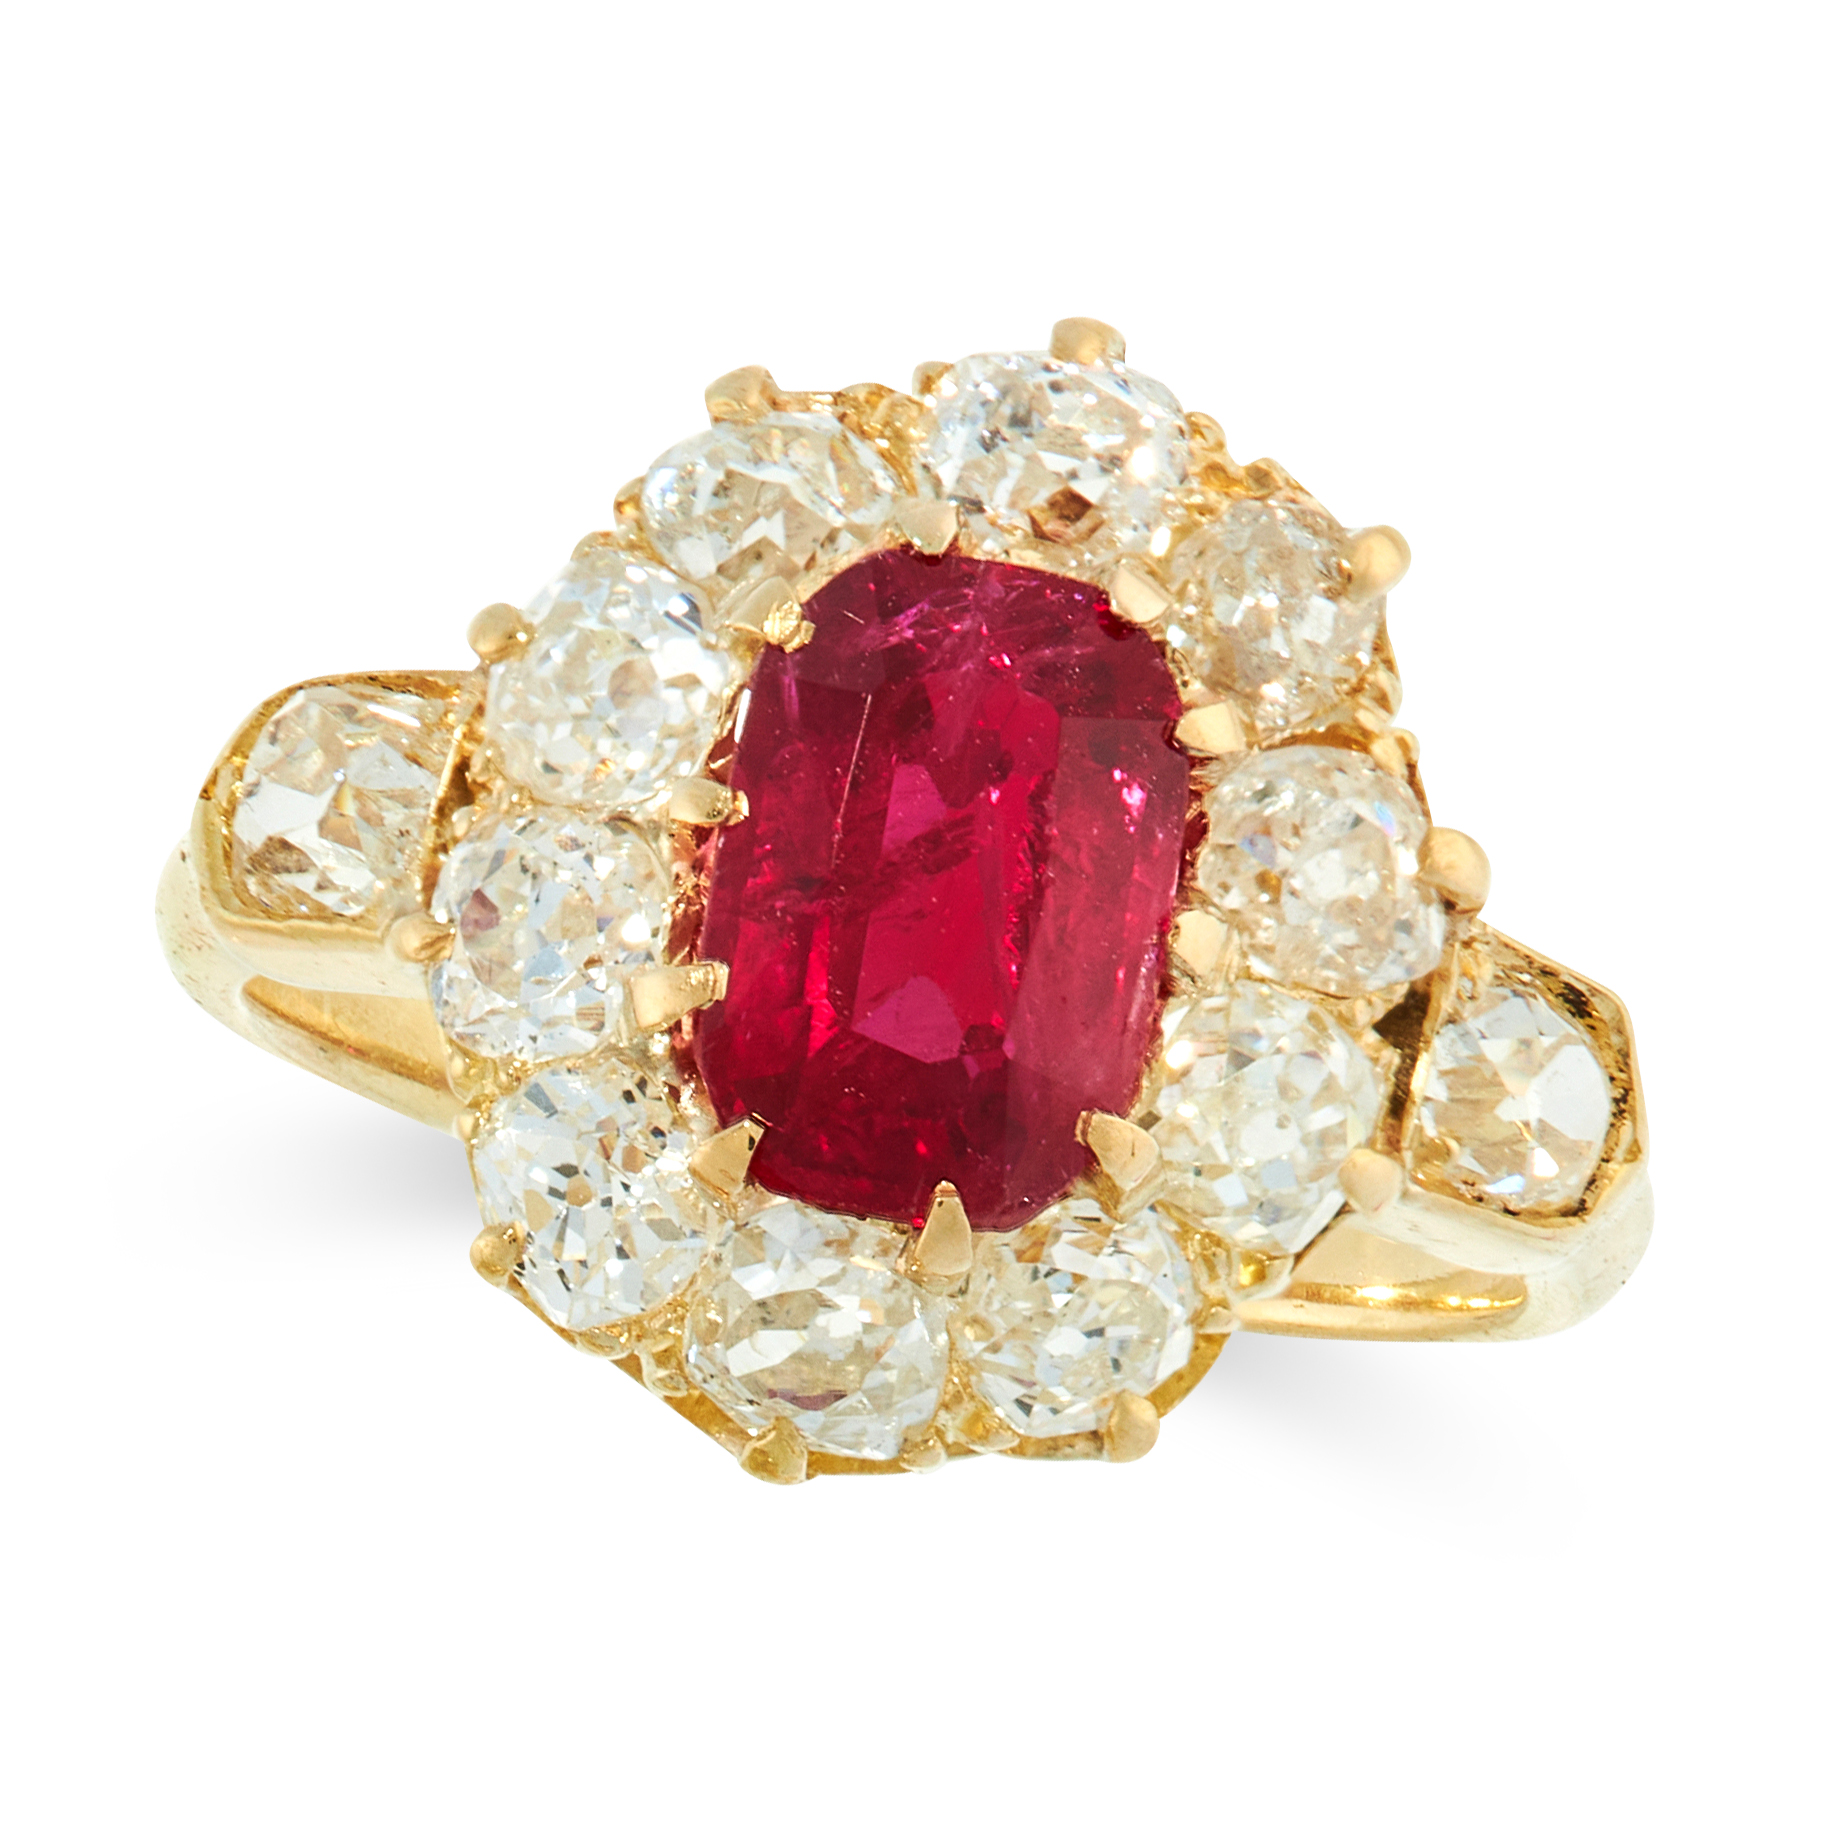 AN ANTIQUE RUBY AND DIAMOND DRESS RING in high carat yellow gold, set with a cushion cut ruby of 1.